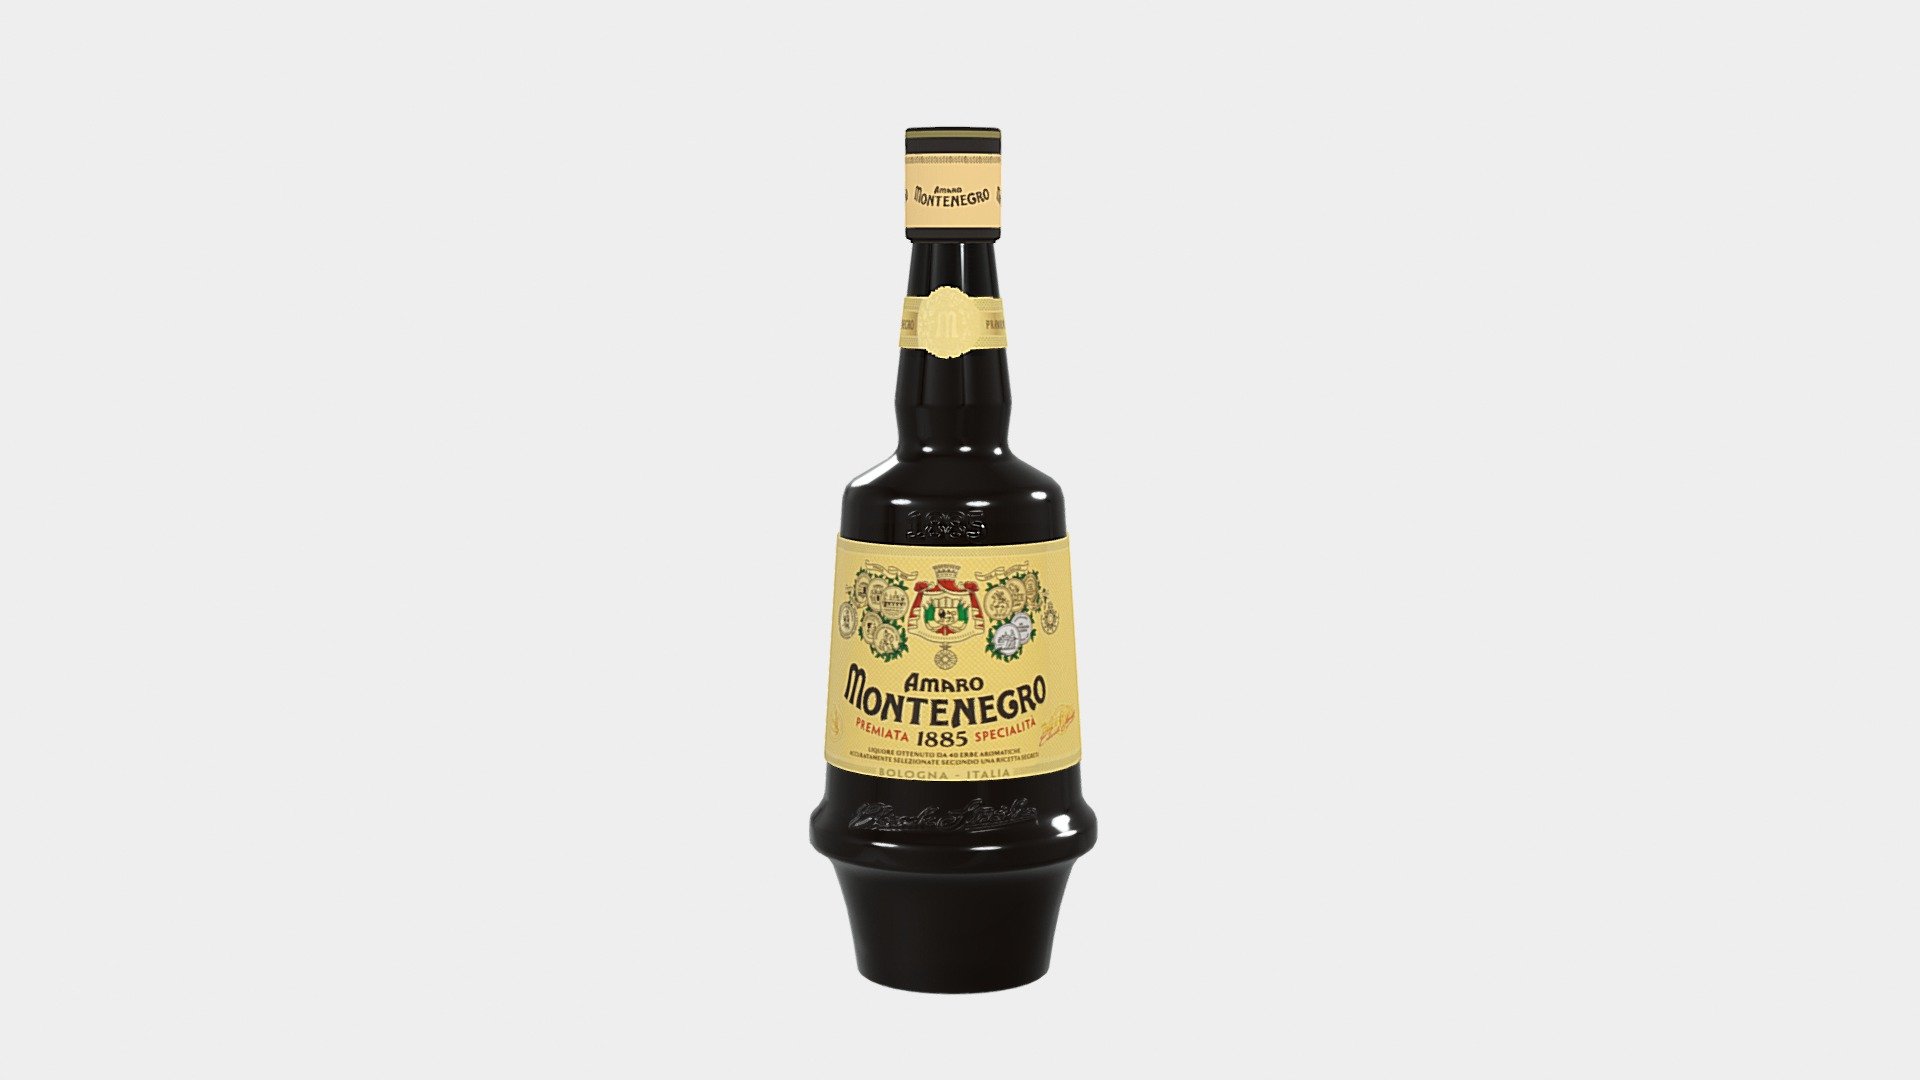 Montenegro amaro cl.70

VR and game ready for high quality Architectural Visualization

PRD8000330014458_0 - Montenegro amaro cl.70 - 3D model by Invrsion 3d model